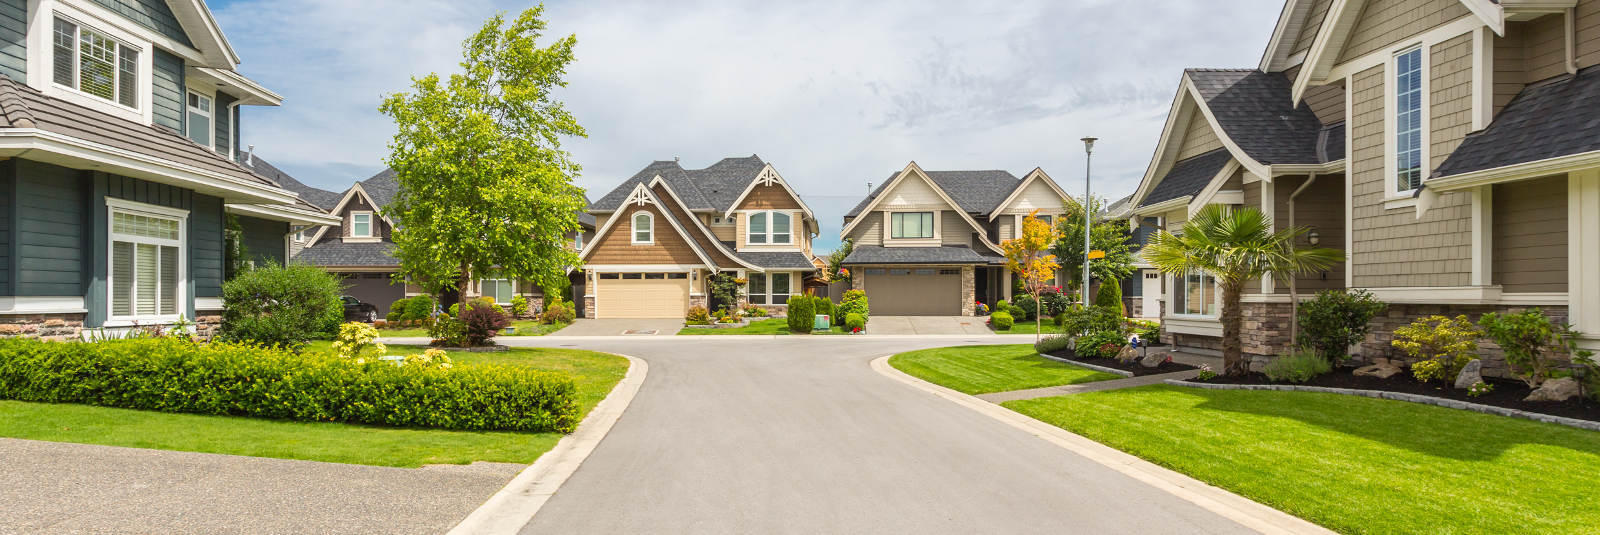 Subrban homes in Indiana 